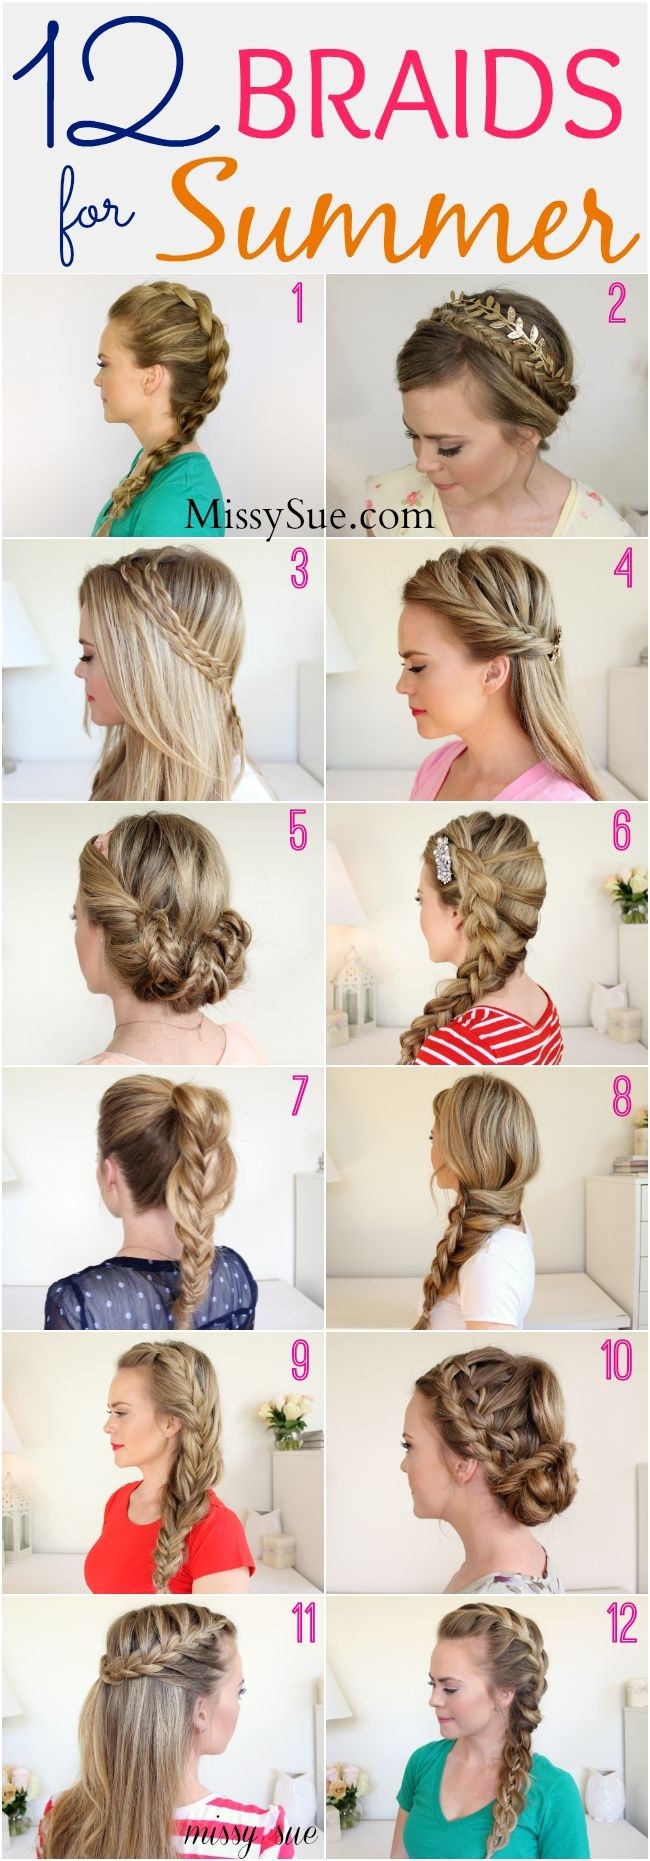 Chic Braided Hairstyles for Girls